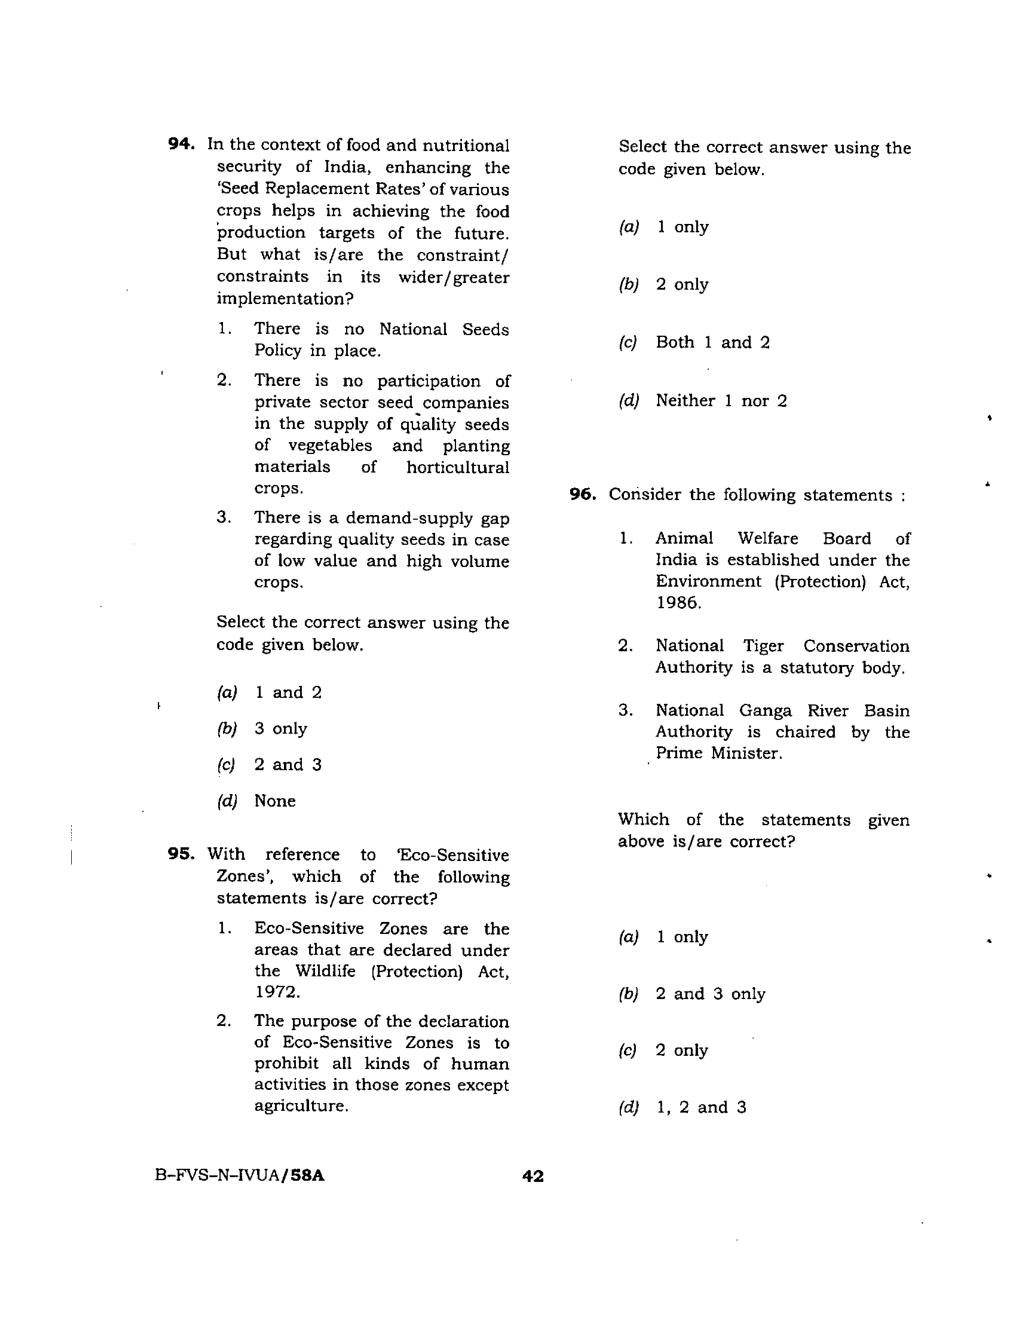 page 42